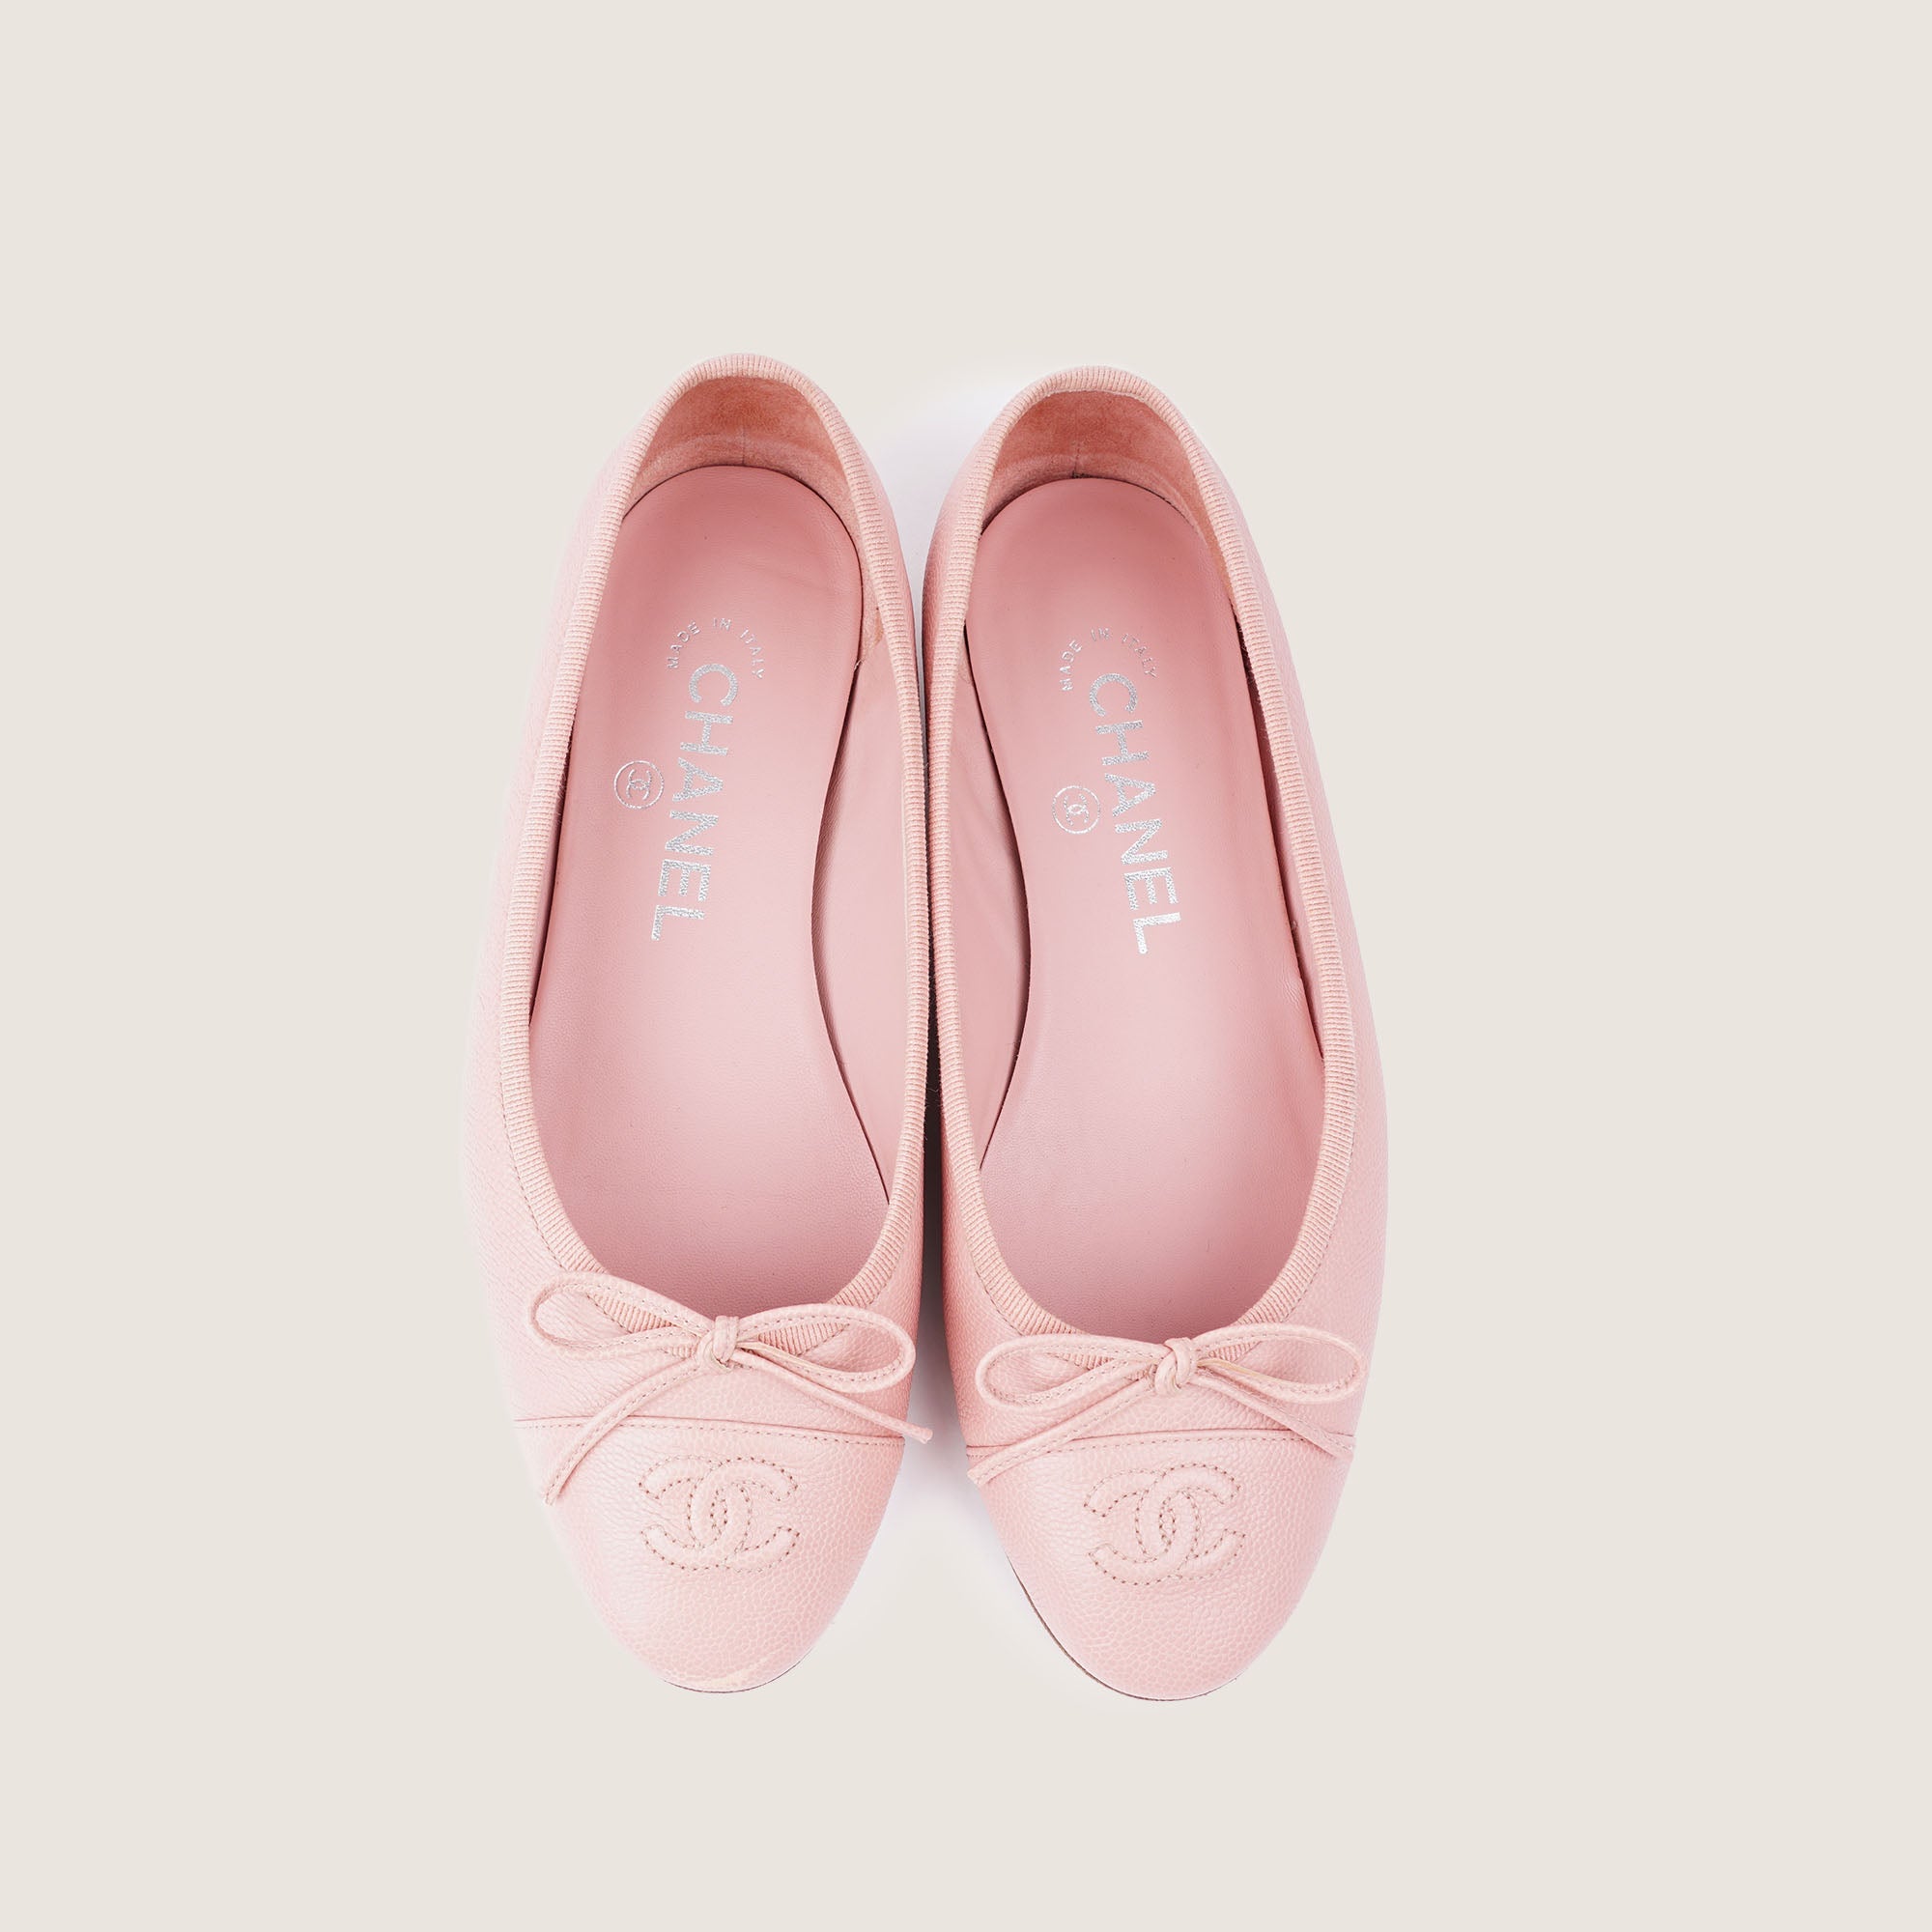 CC Ballerina Flats - CHANEL - Affordable Luxury image